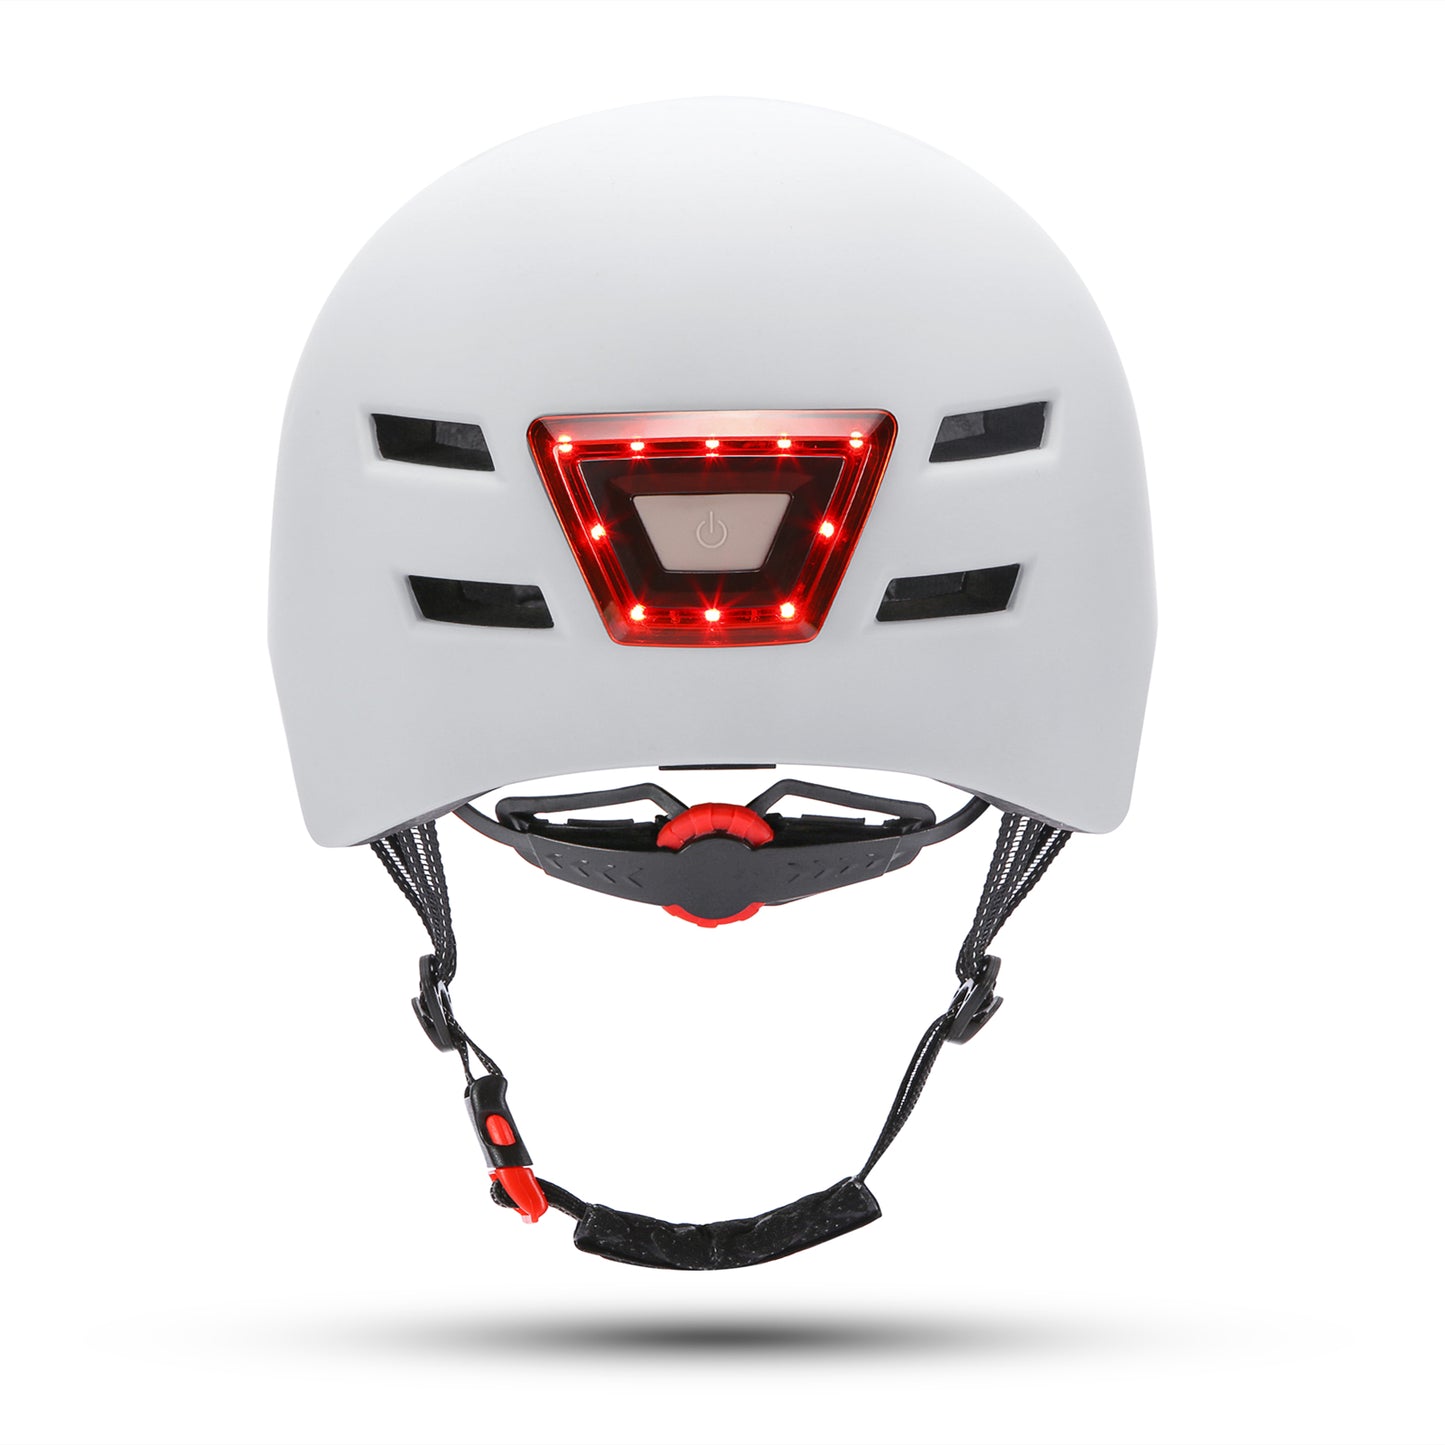 Gudook Manufacturer Classic Bike Helmets with Front and Rear Warning LED